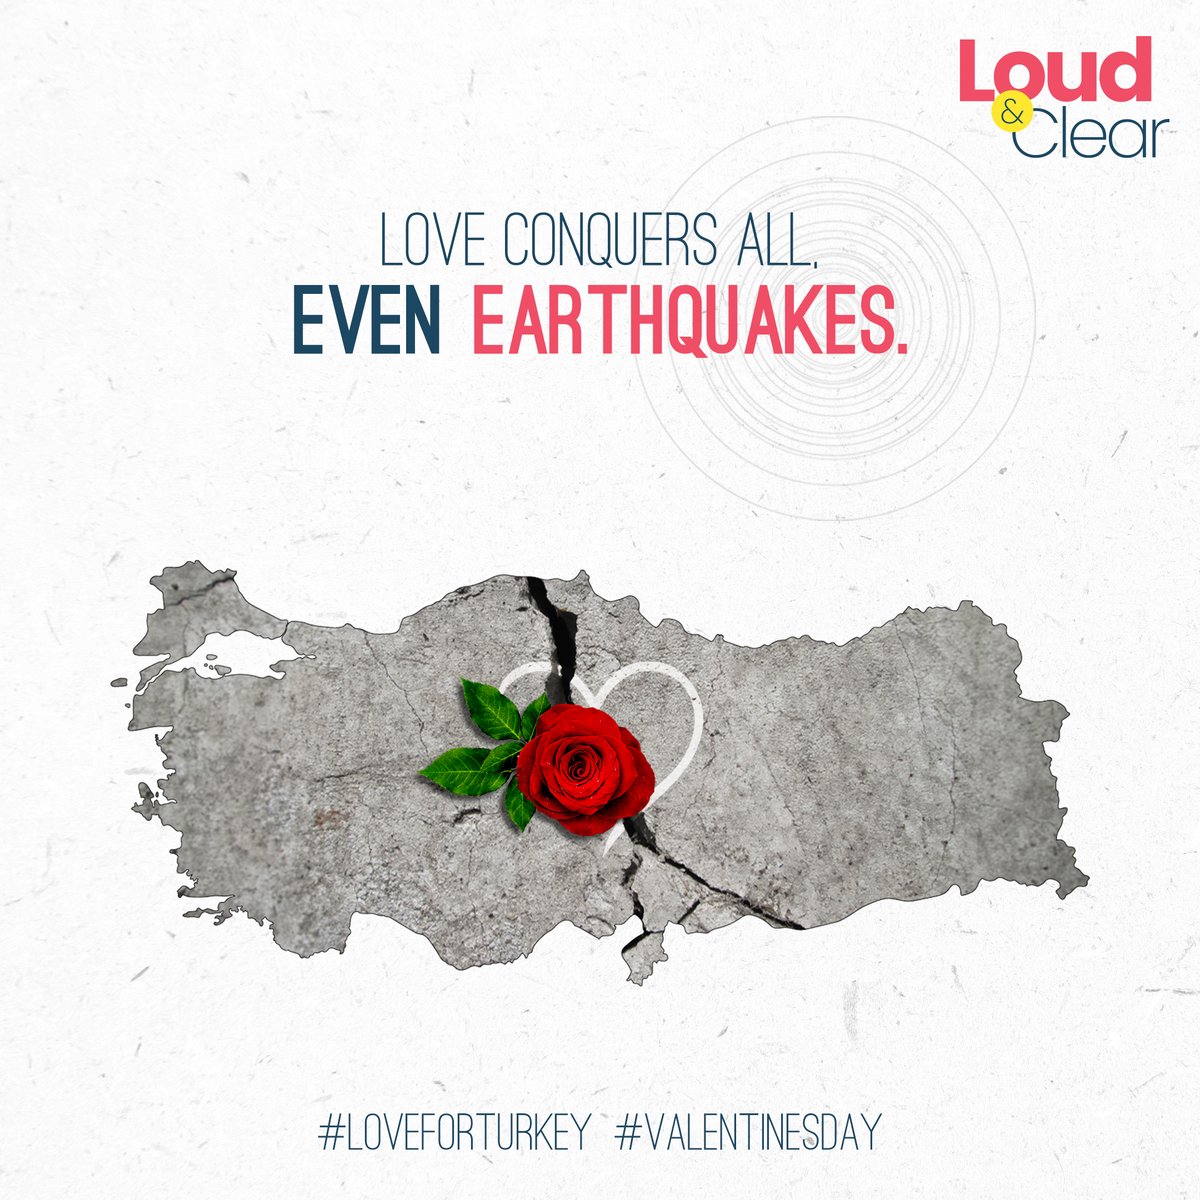 Love is not just about flowers and chocolates. It's about standing with those who need it most. Our hearts go out to Turkey. We send our love and strength on this Valentine's Day. ❤️🤗🌹

#LoveForTurkey #TurkeyEarthquake #LoveHeals #LoveAndStrength #valentines #valentinesday